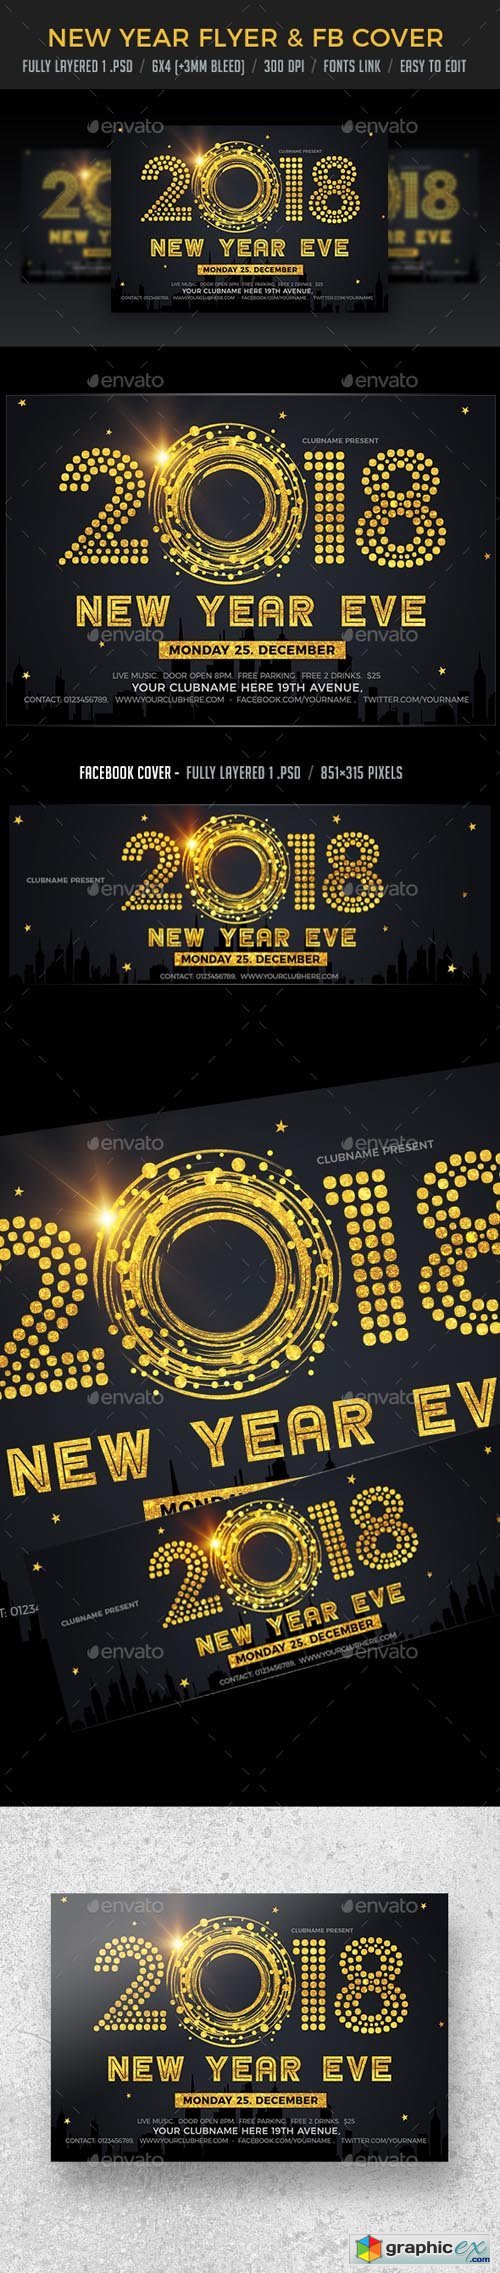 New Year Eve Flyer & FB Cover